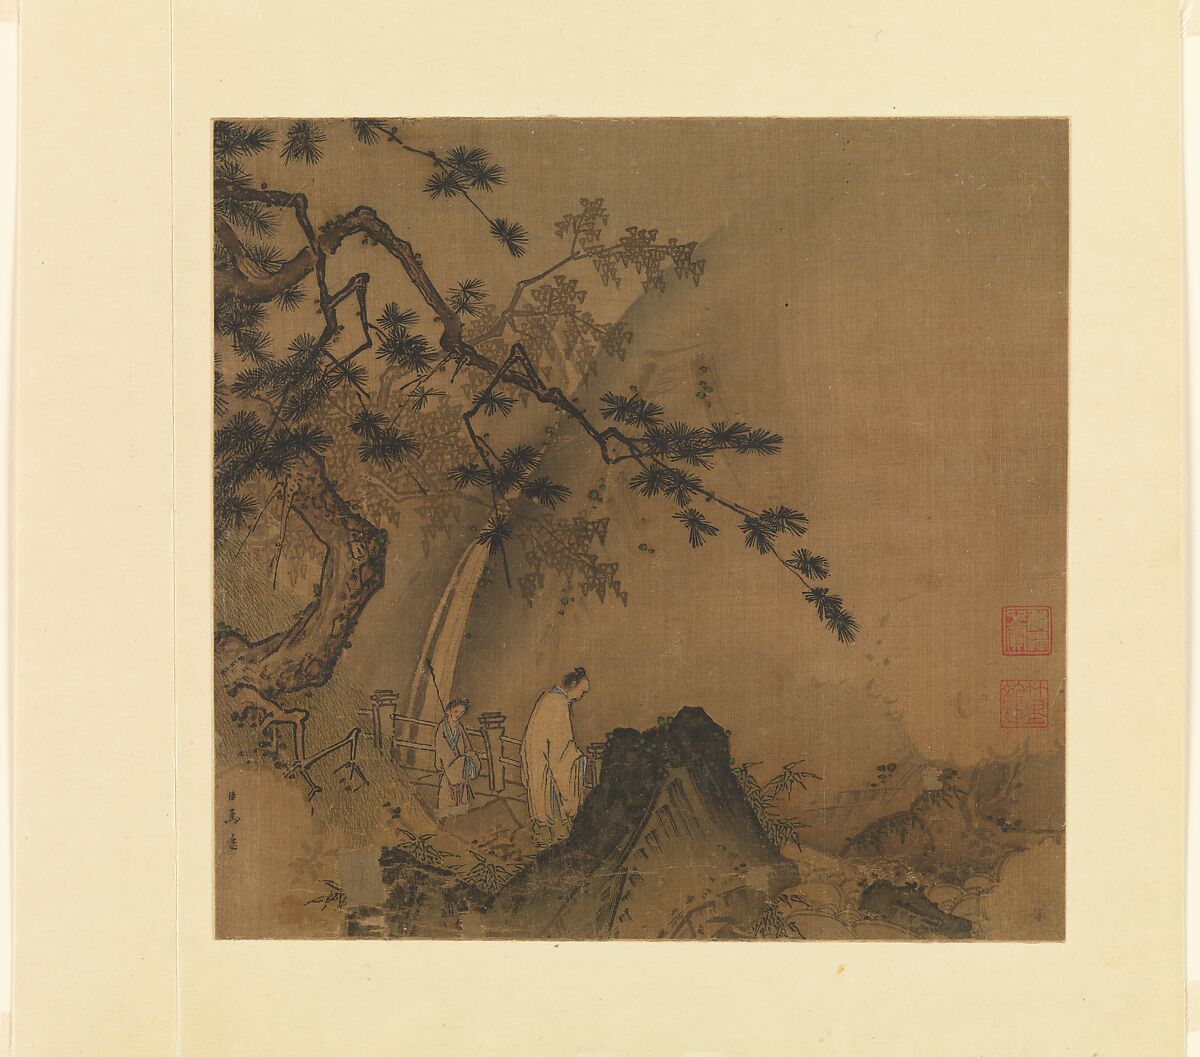 Scholar viewing a waterfall, Ma Yuan, Album leaf; ink and color on silk, China